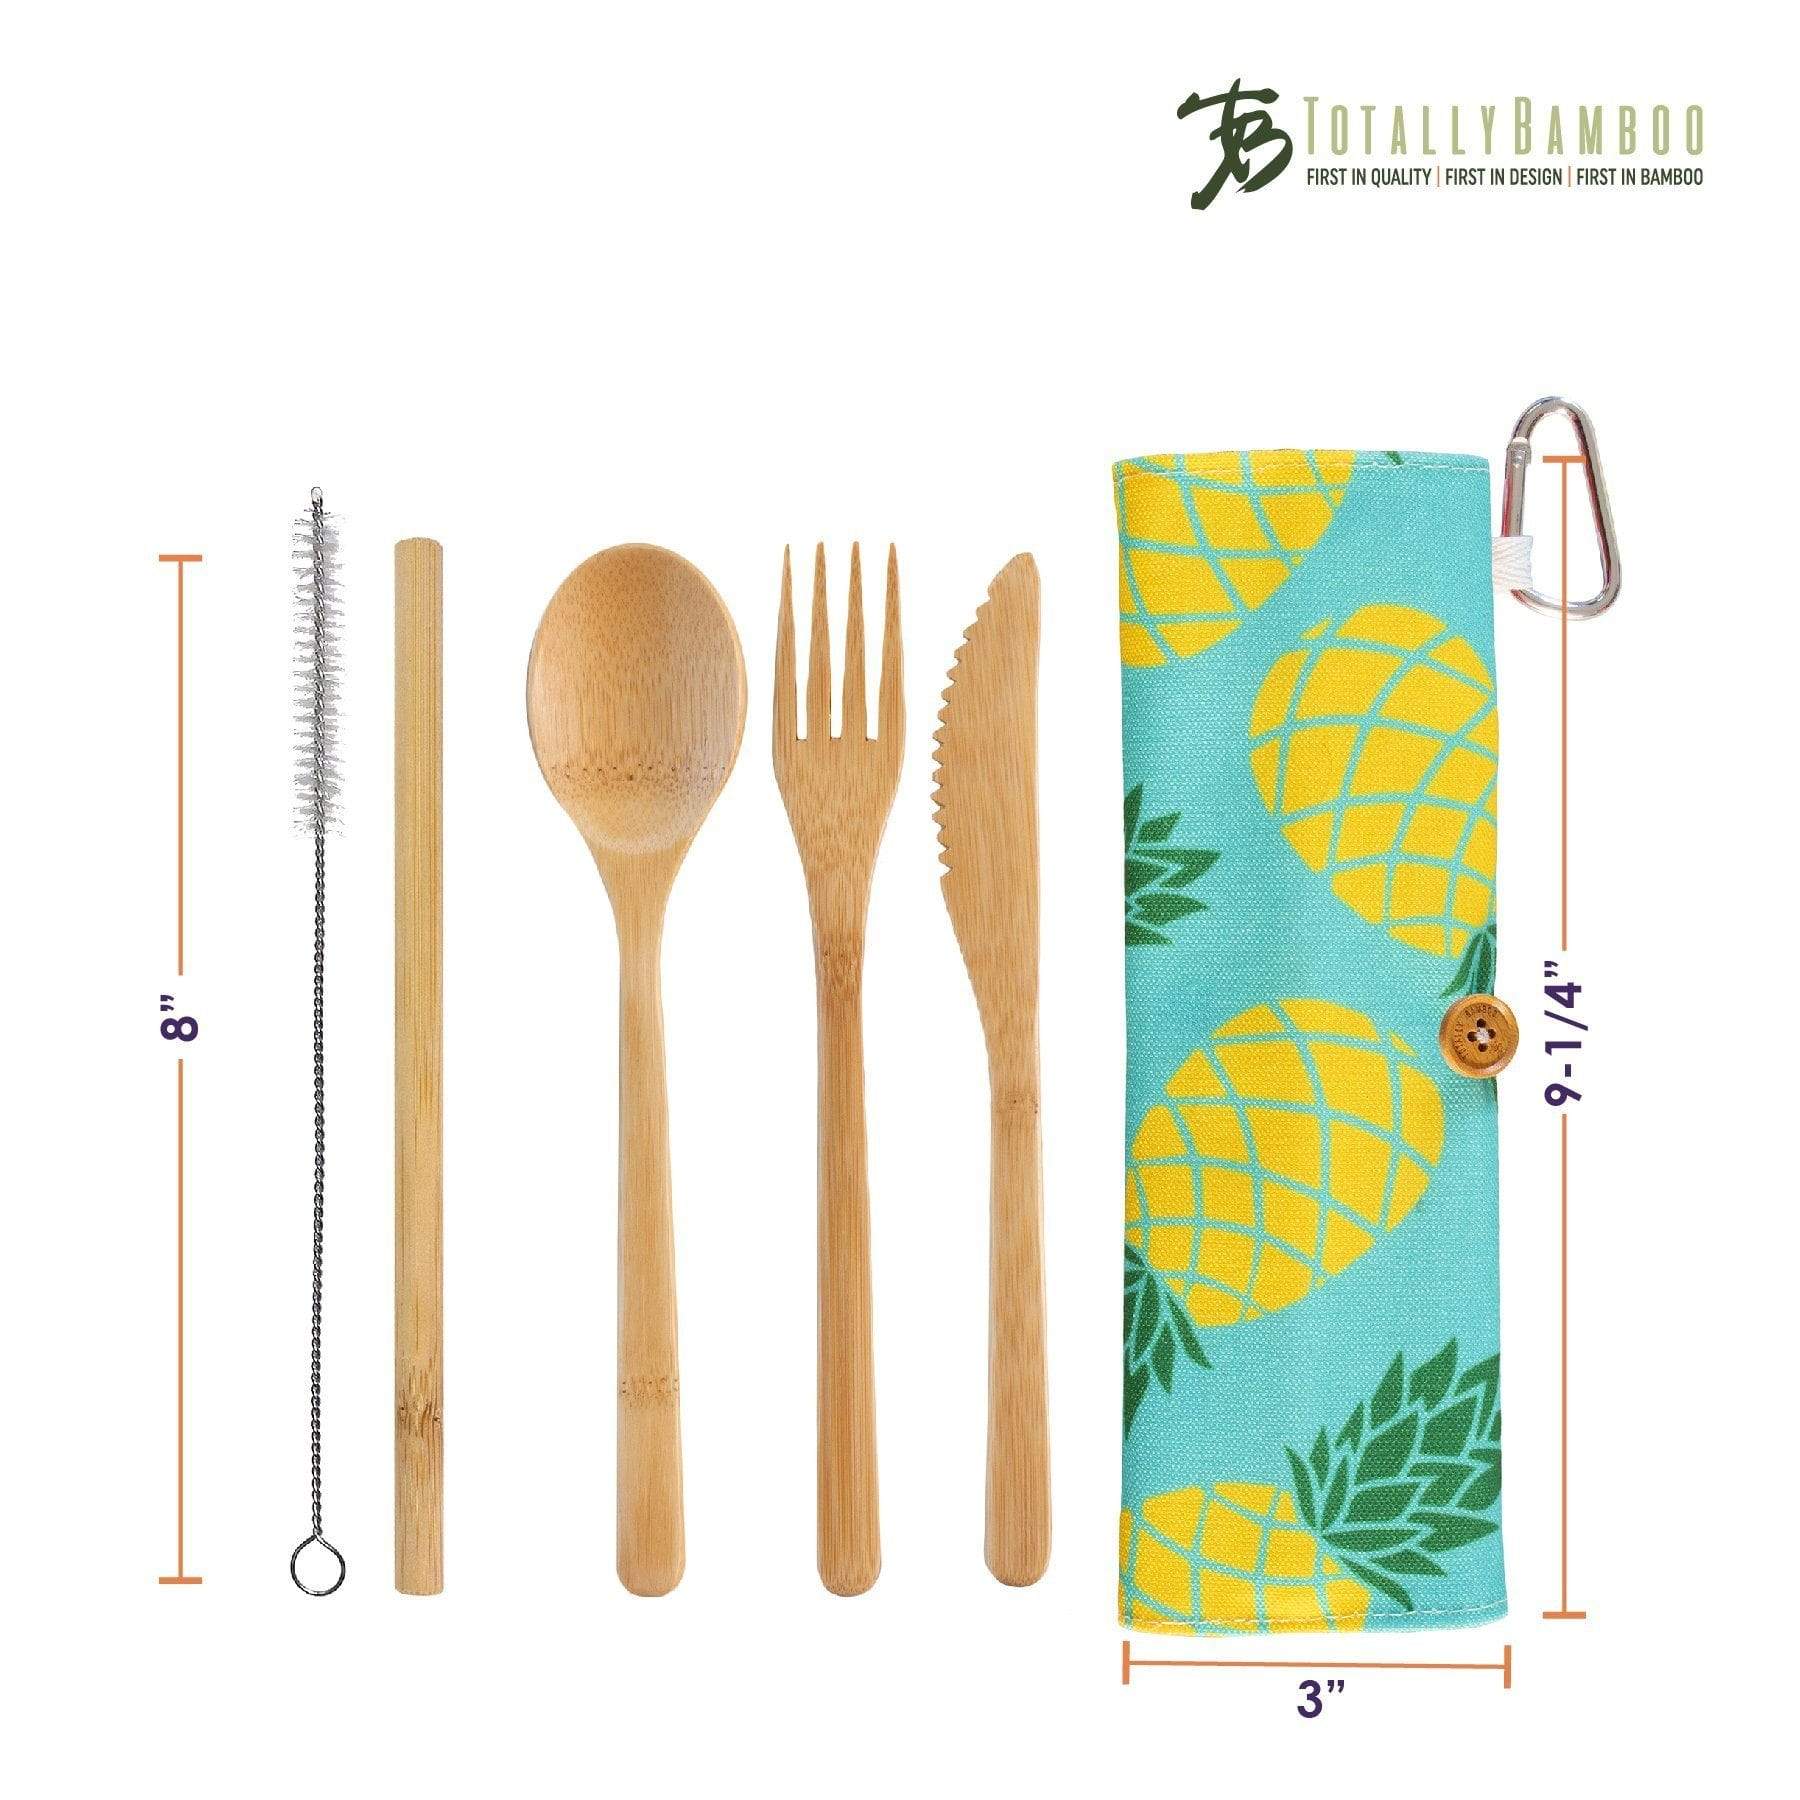 Totally Bamboo Totally Bamboo Take Along Reusable Utensil Set with Pineapple Style Travel Case